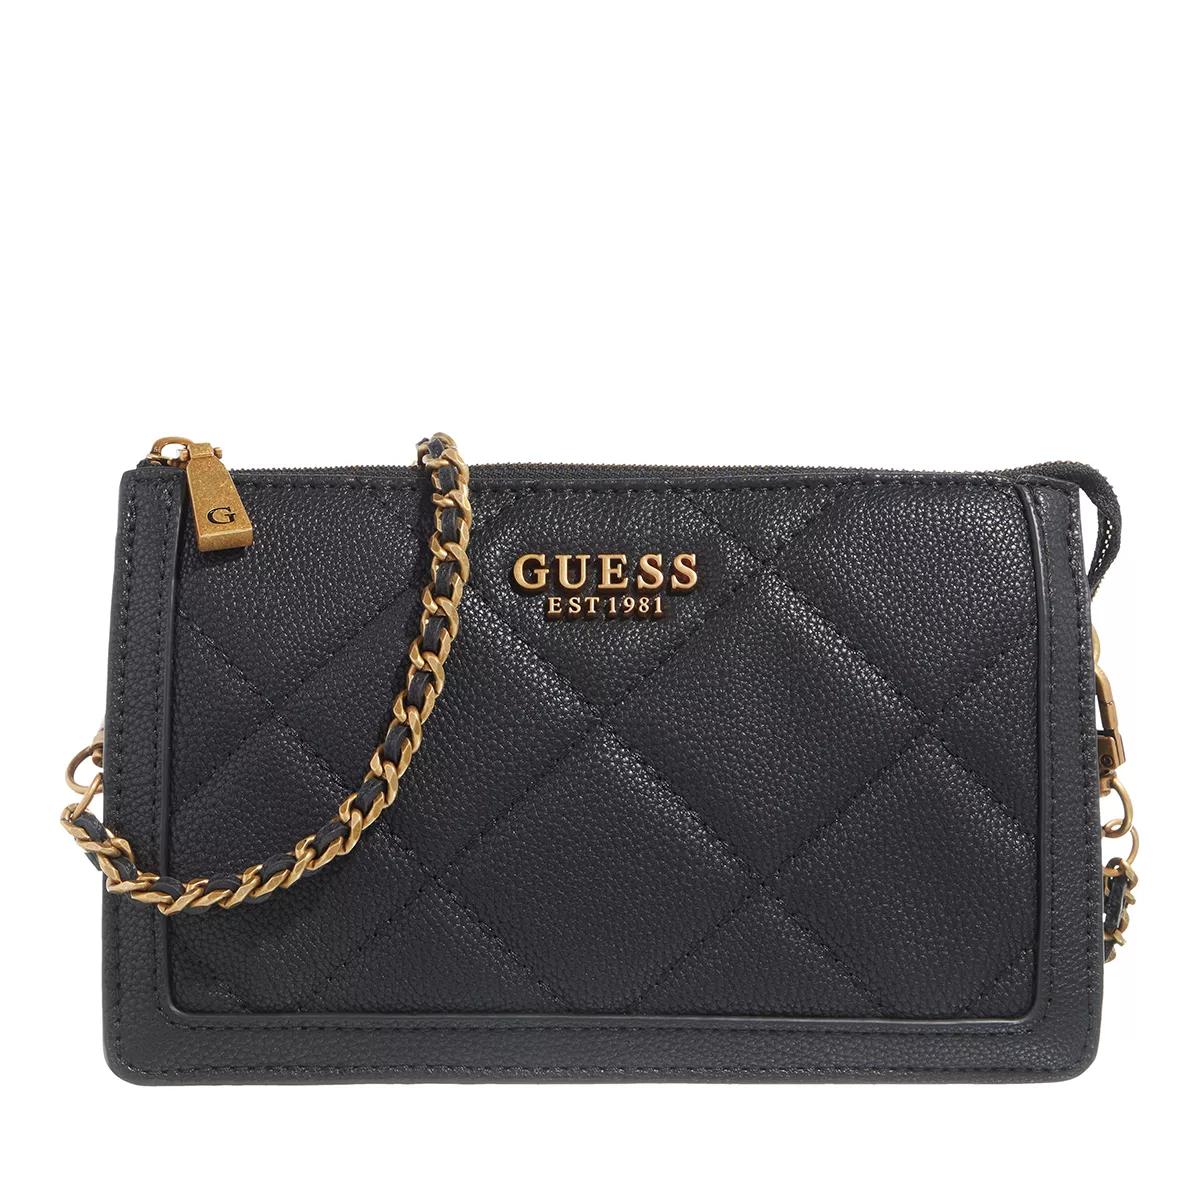 Guess Abey Multi Compartment Crossbody in Metallic